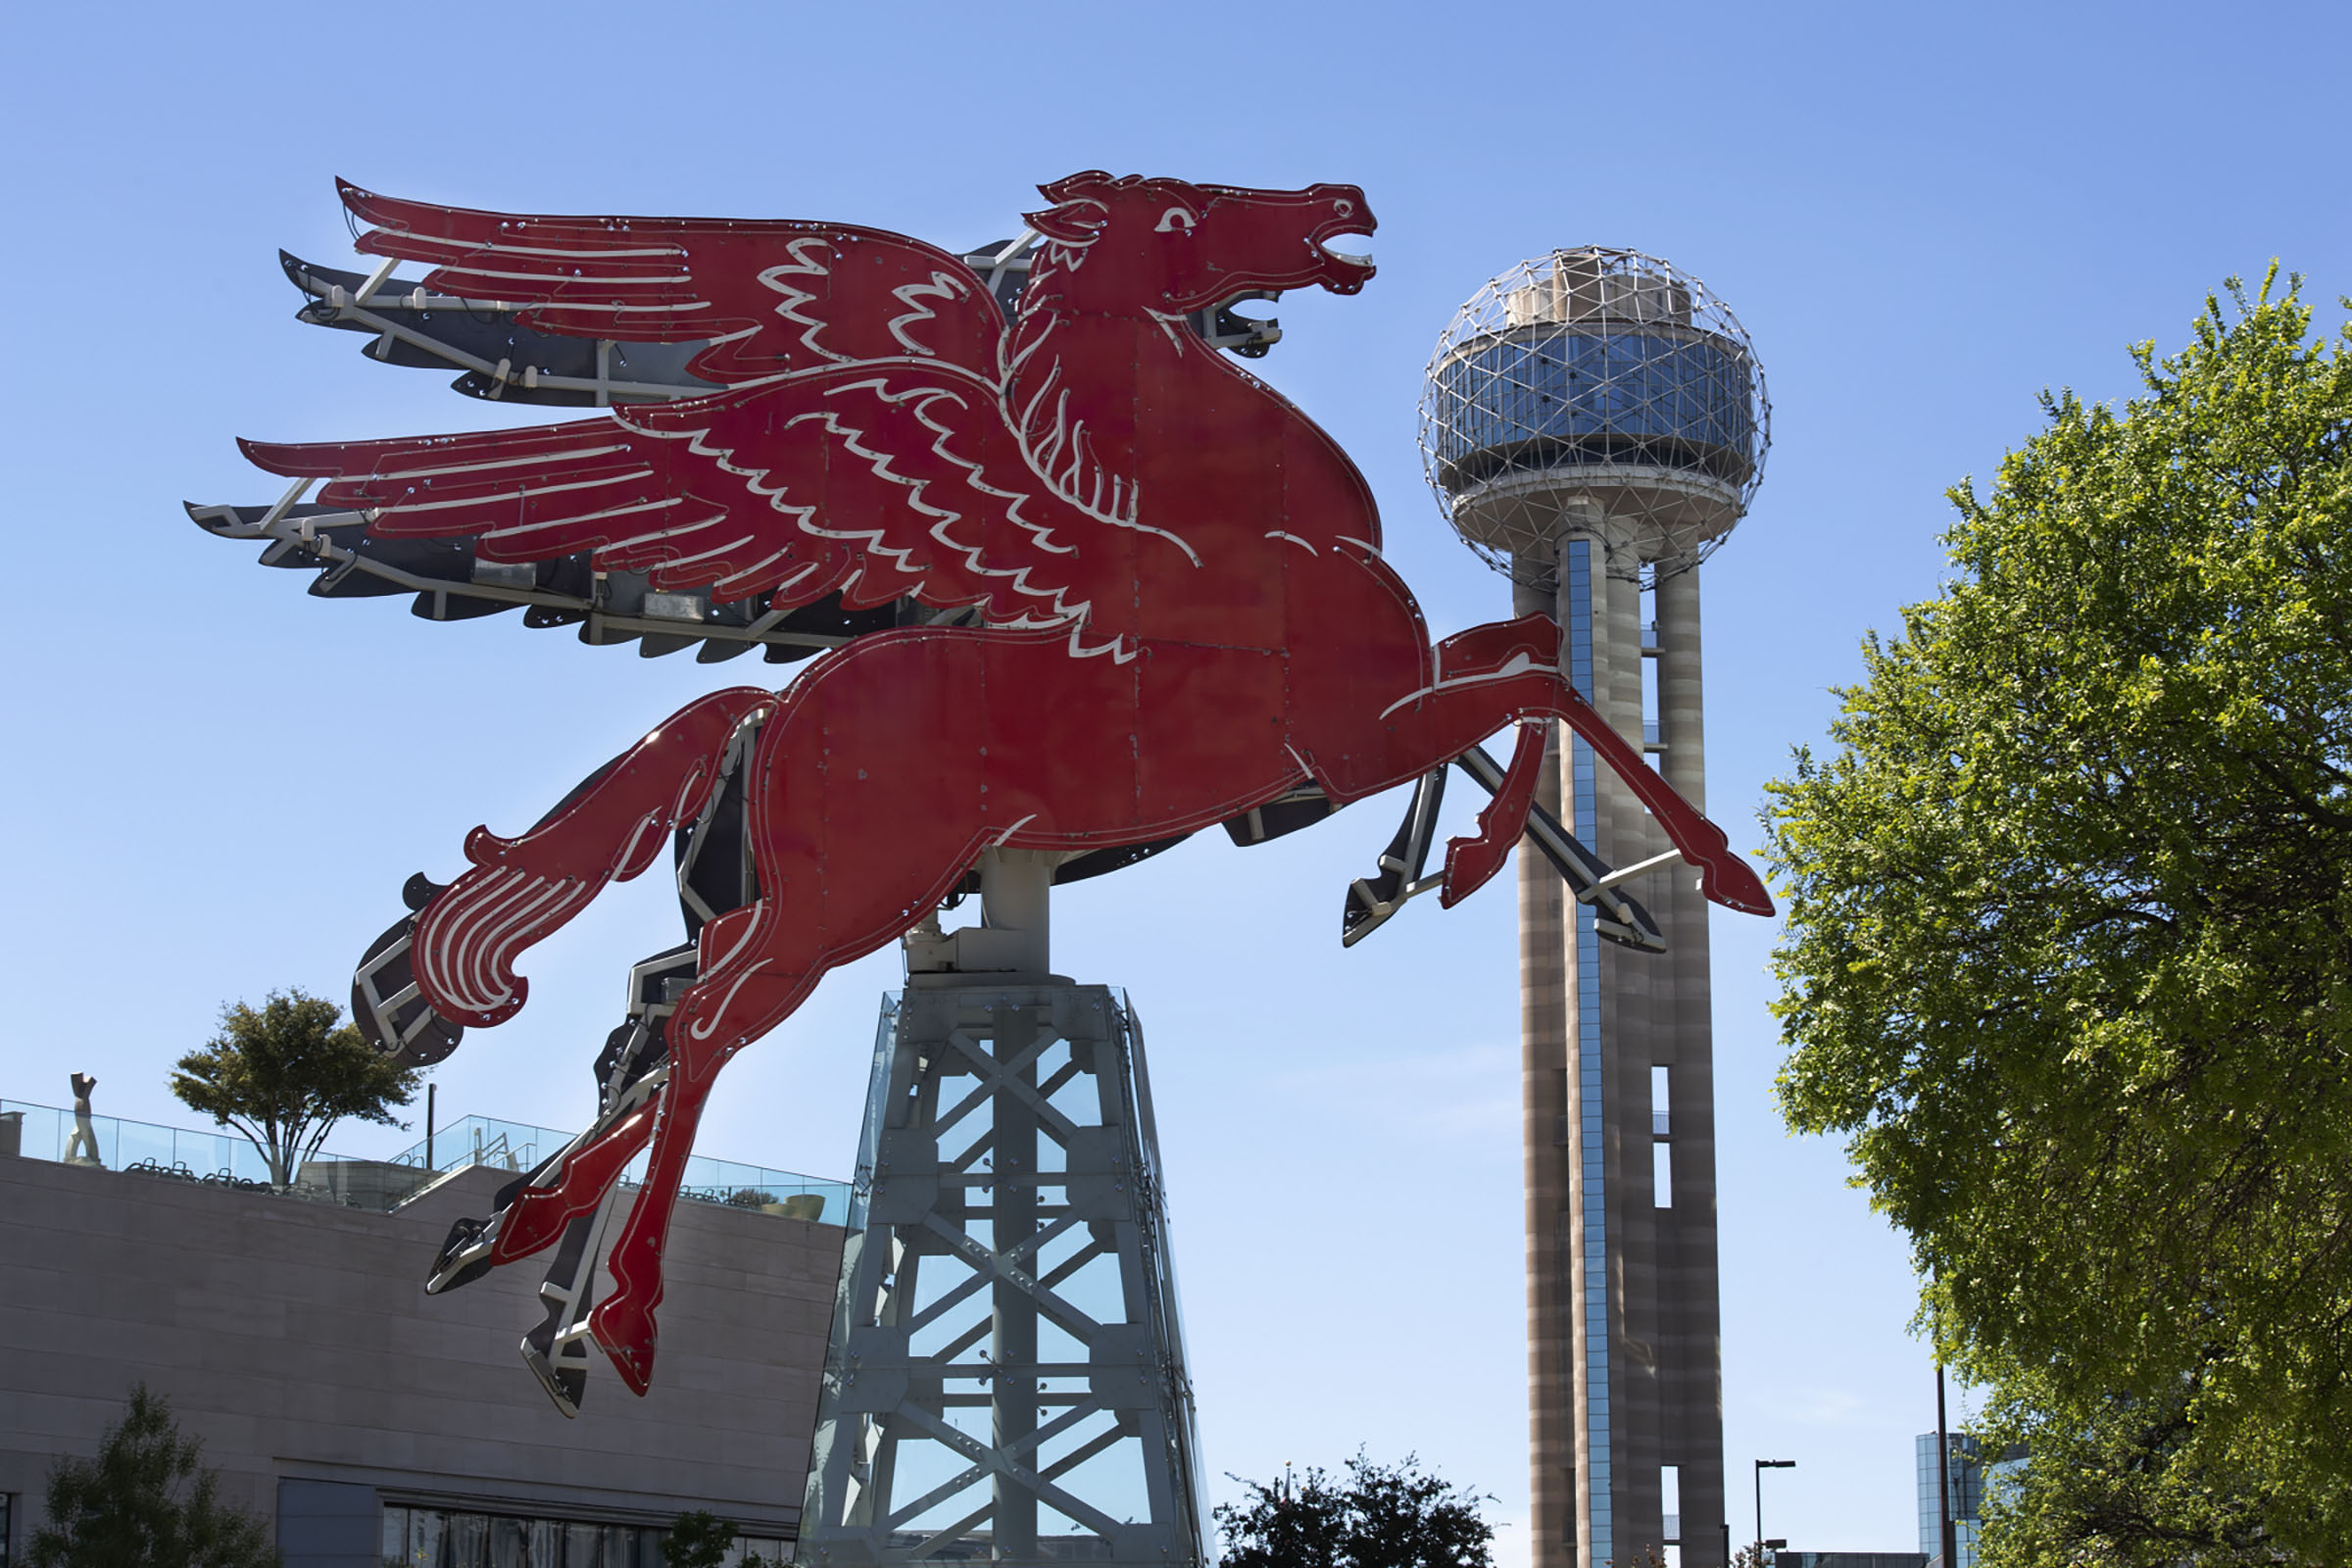 A red Pegasus sculpture flies in front of a large building with a spire